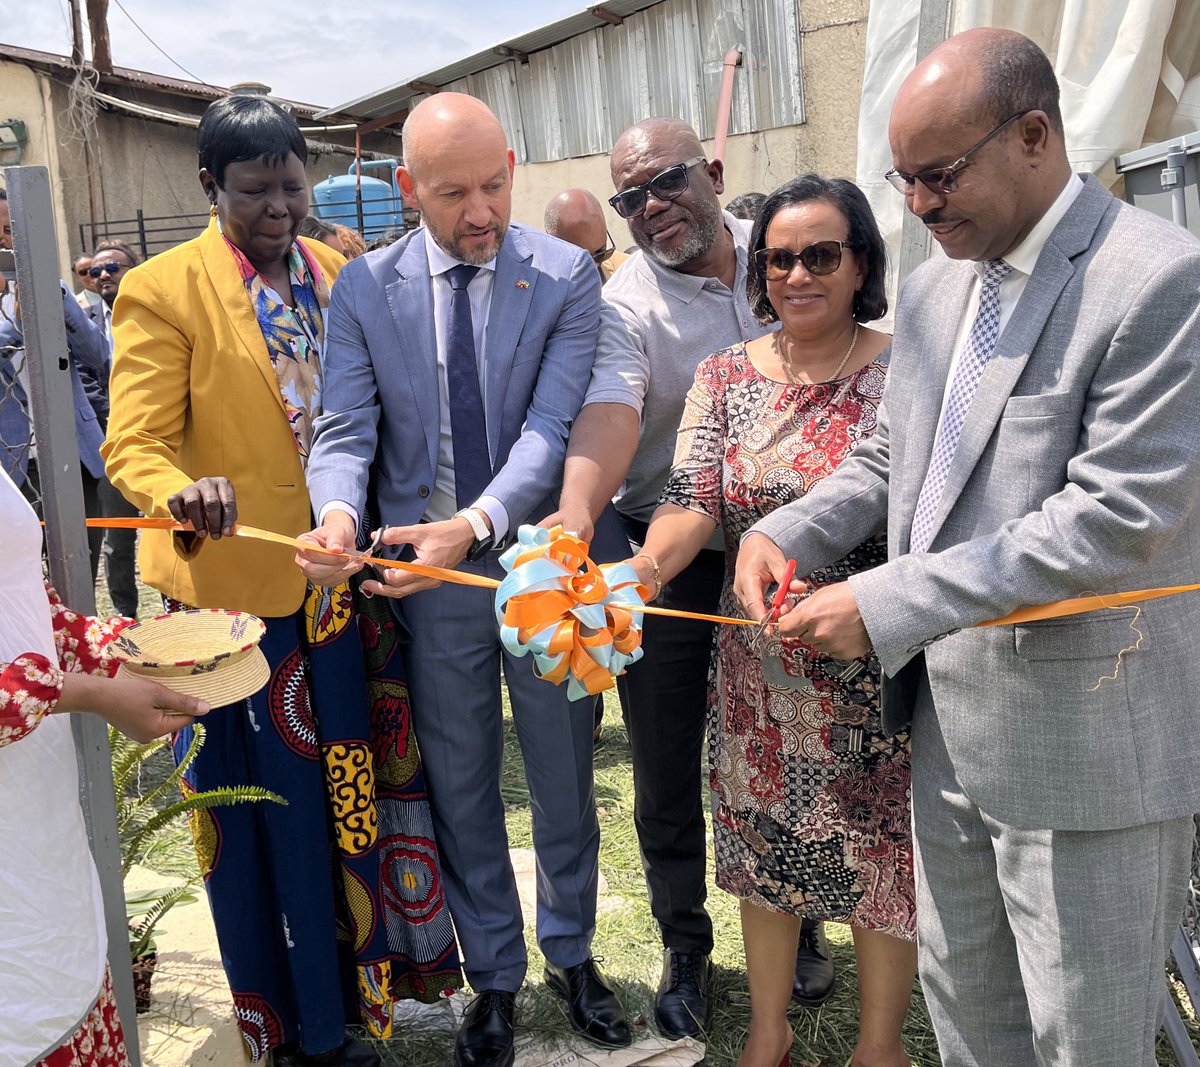 Happening Now ! The @ILO in partnership with @ethio_Industry and @Pf_Change is inagurating work place day care centers in two factories in Addis Ababa Special thanks to @NorwayMFA for the financial support. @MusindoAlexio @NorwayinAddis @ILOAfrica